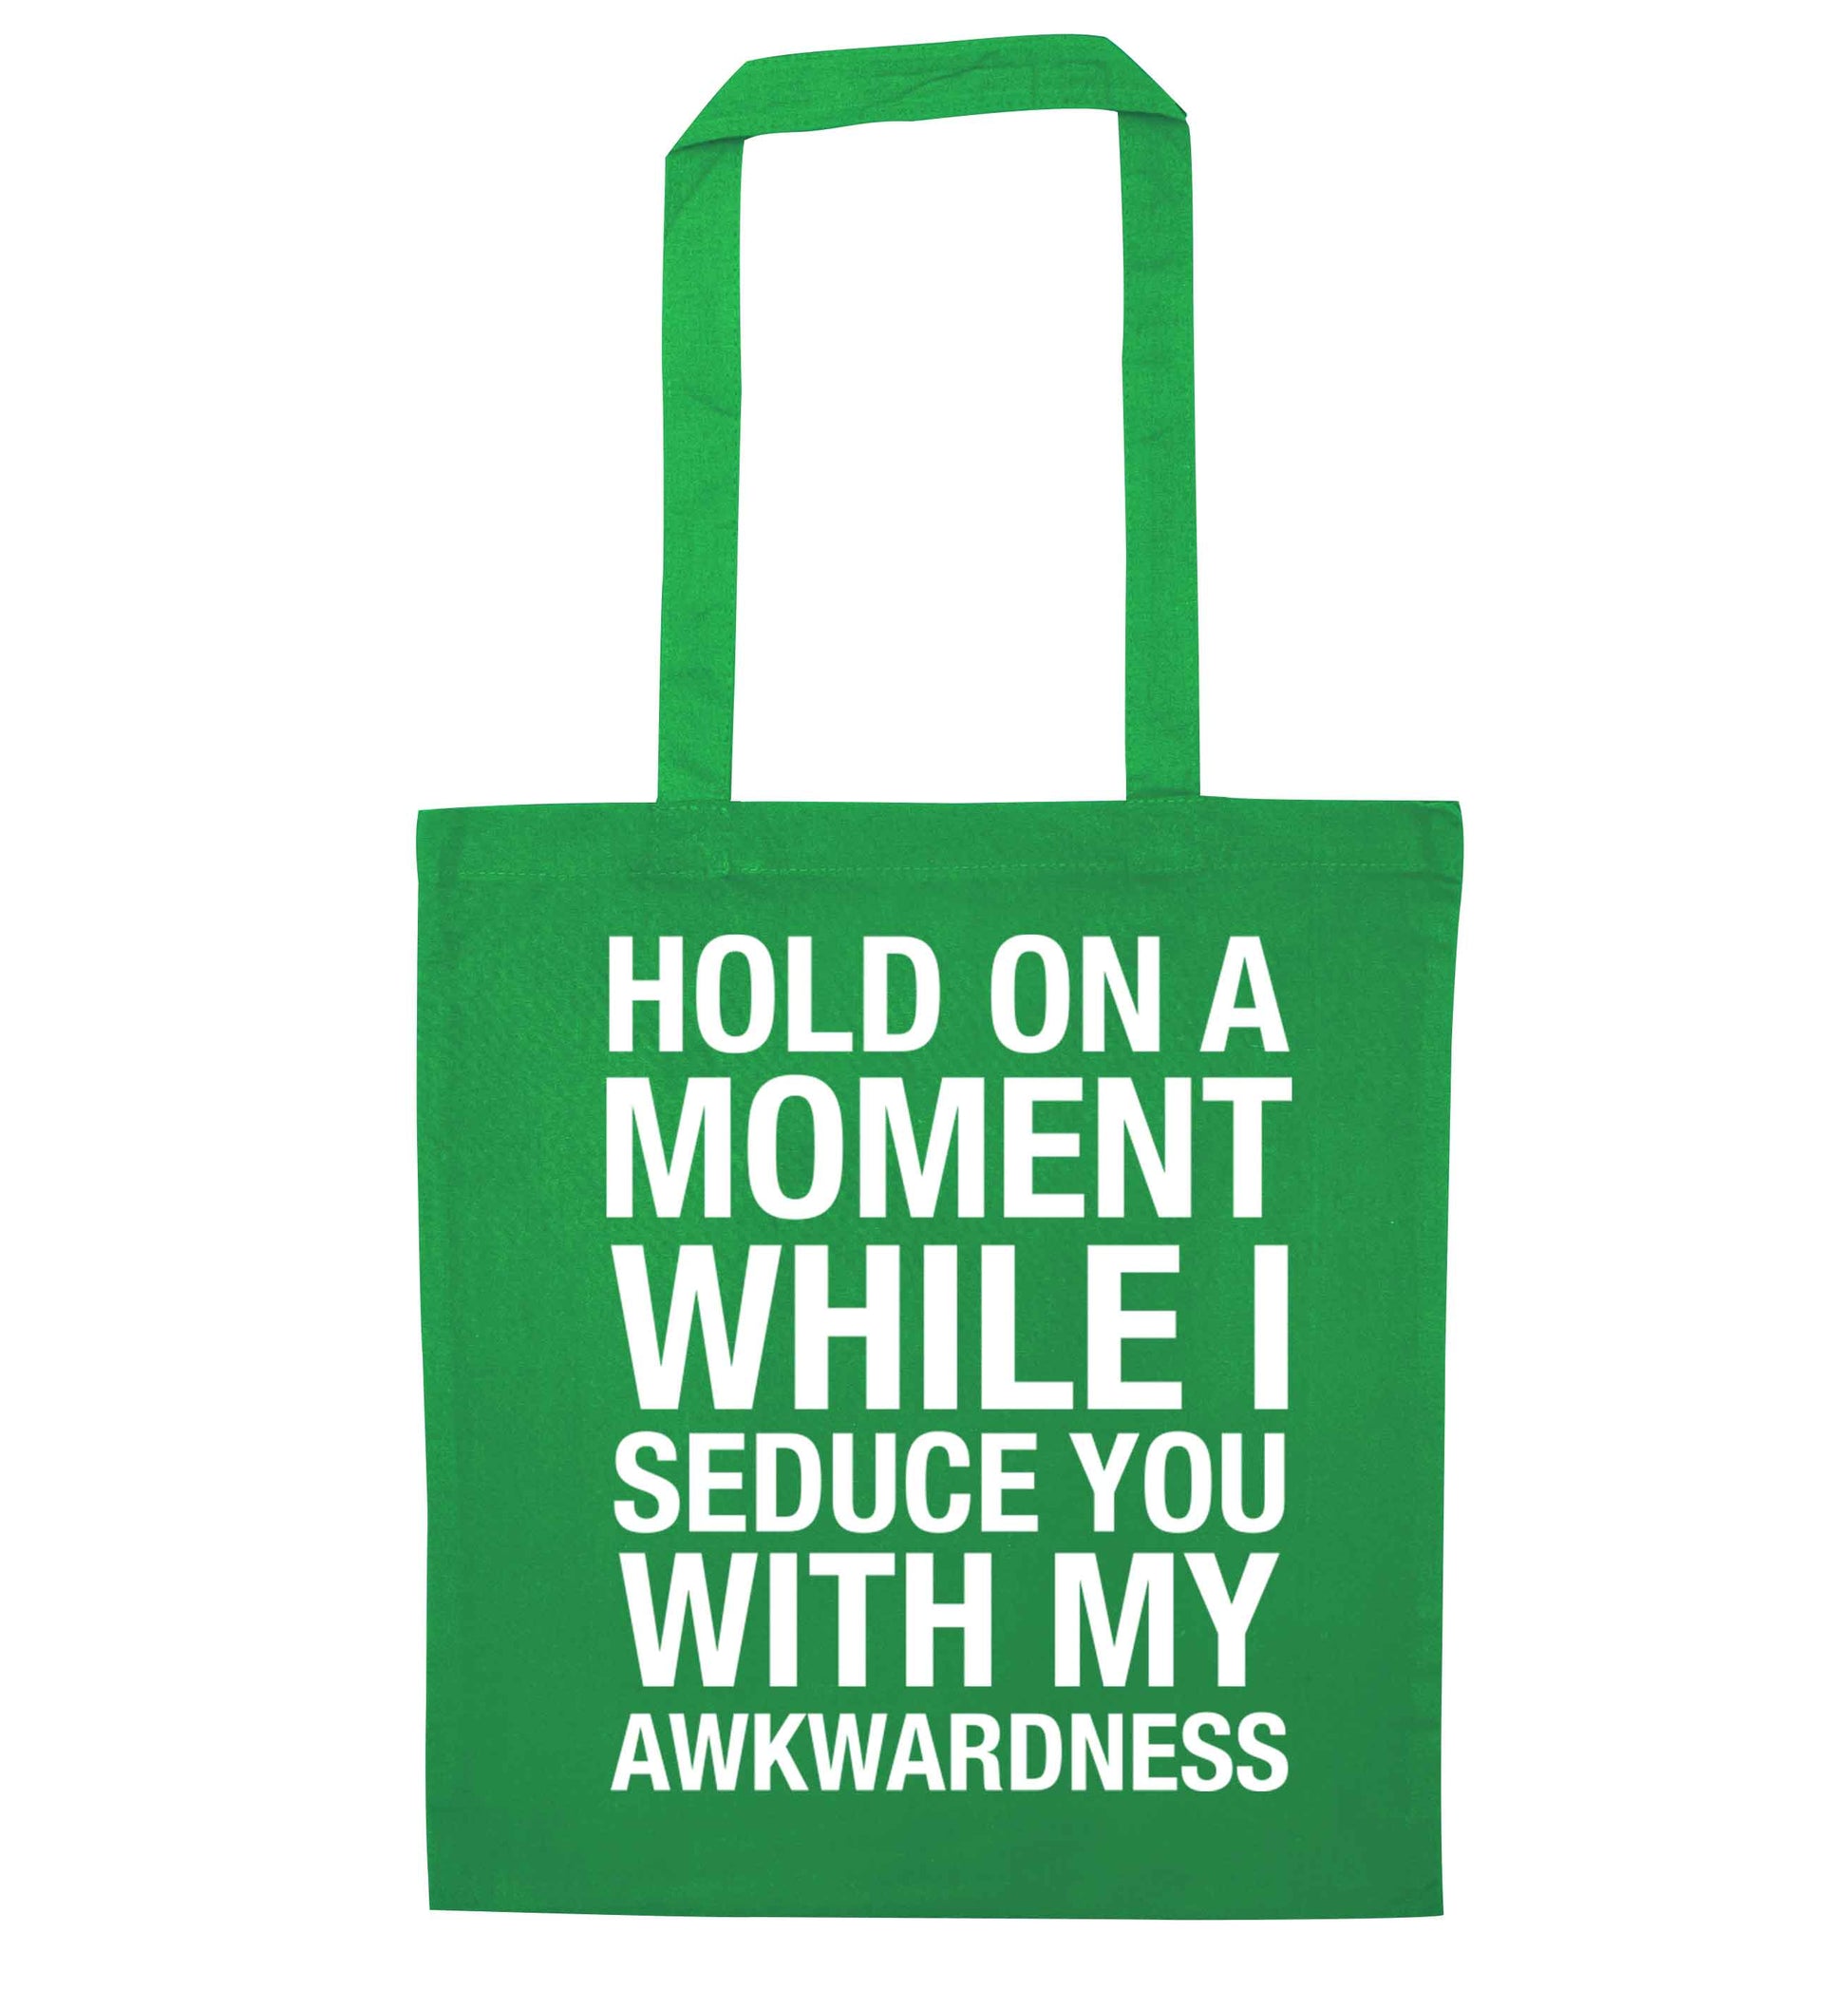 Hold on a moment while I seduce you with my awkwardness green tote bag